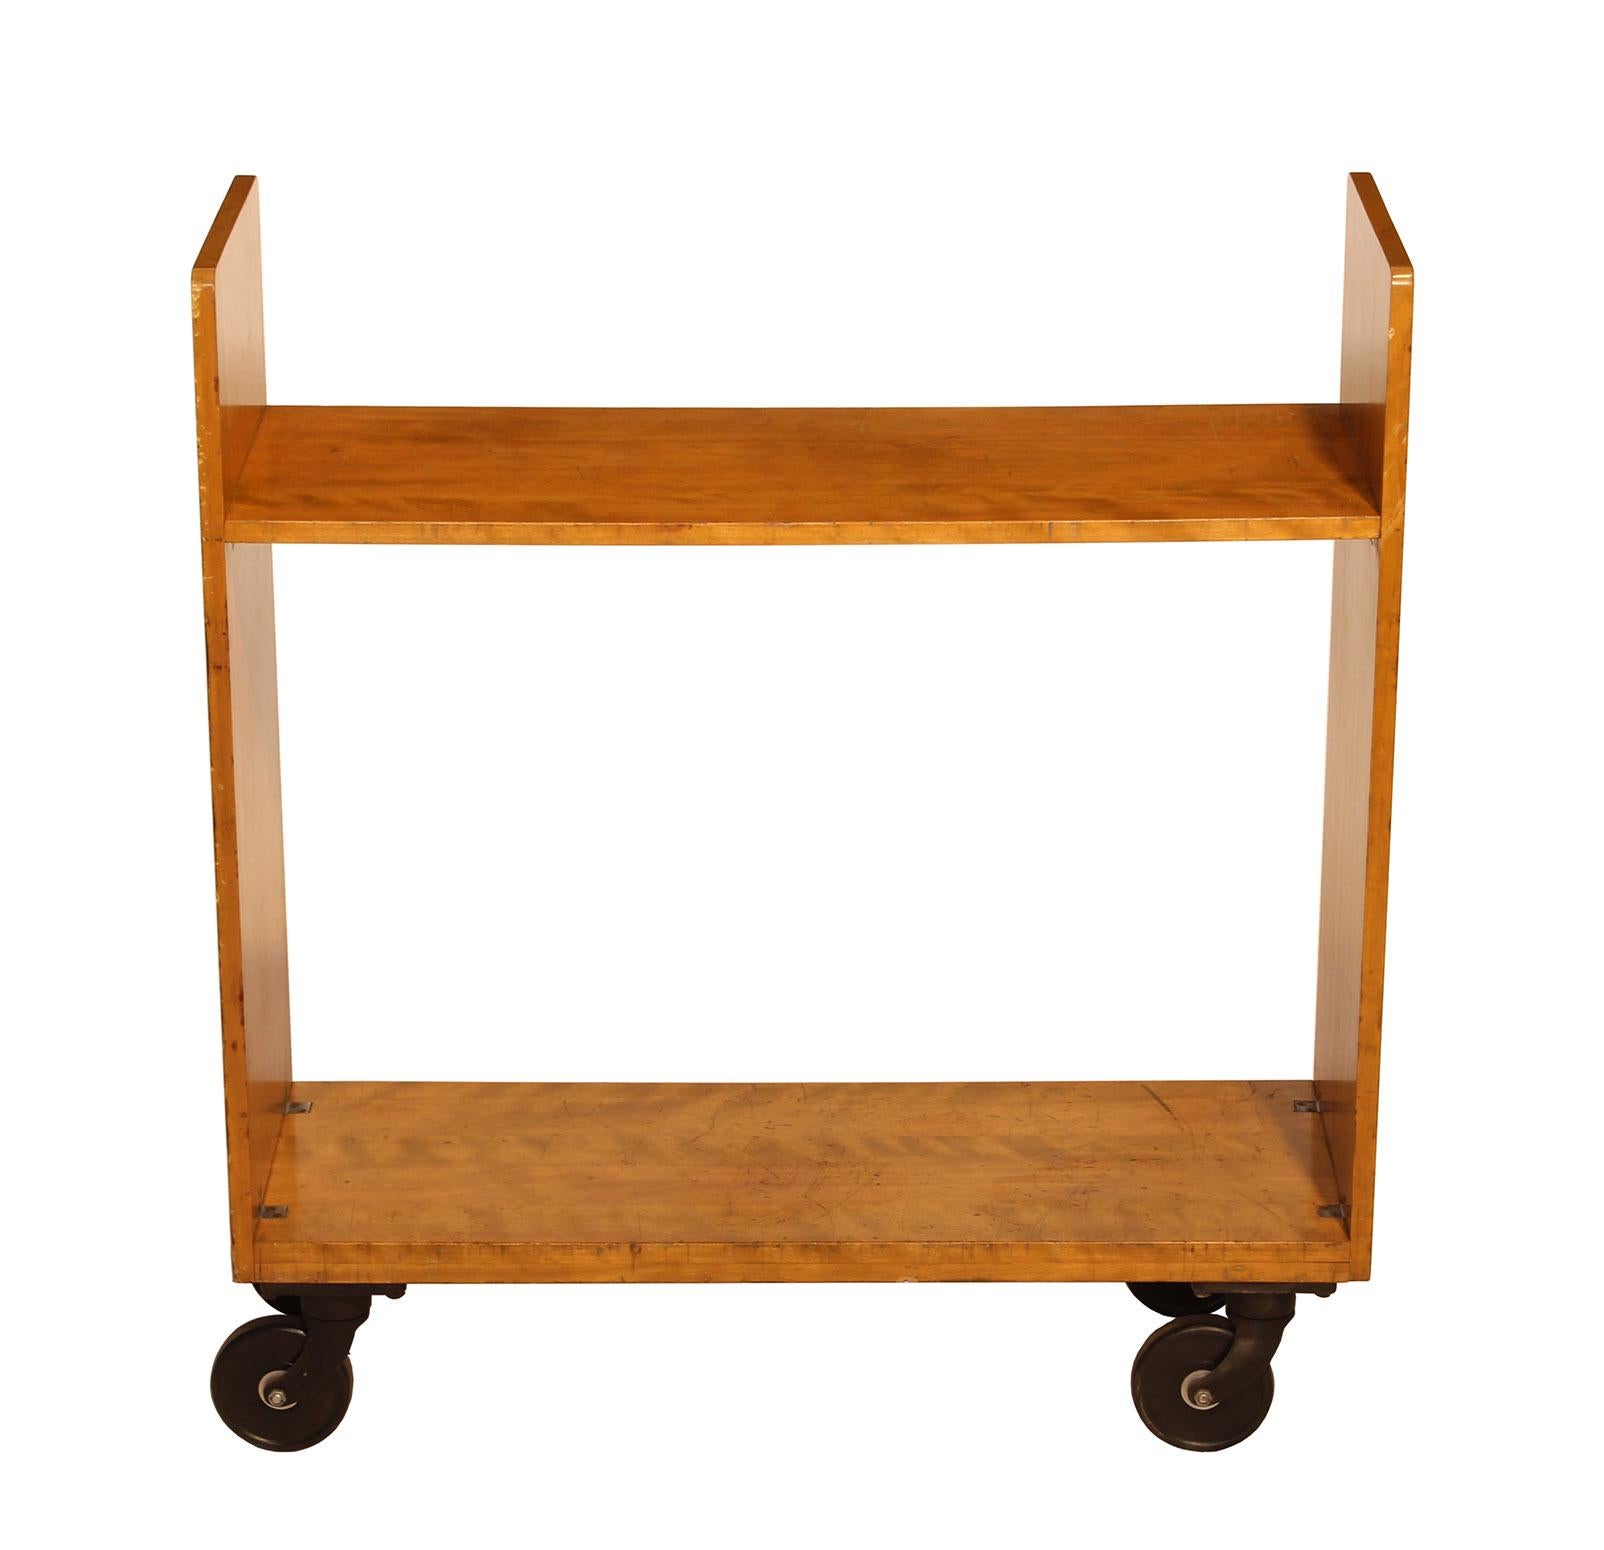 Authentic 1940s library cart made by 'Remington Rand Library Bureau Div - Made in USA' - Four cast iron casters read - 'Kilian Manufacturing Corp. Syracuse N.Y.' - Structurally sound and in well worn condition. Overall dimensions: Width 39 1/8